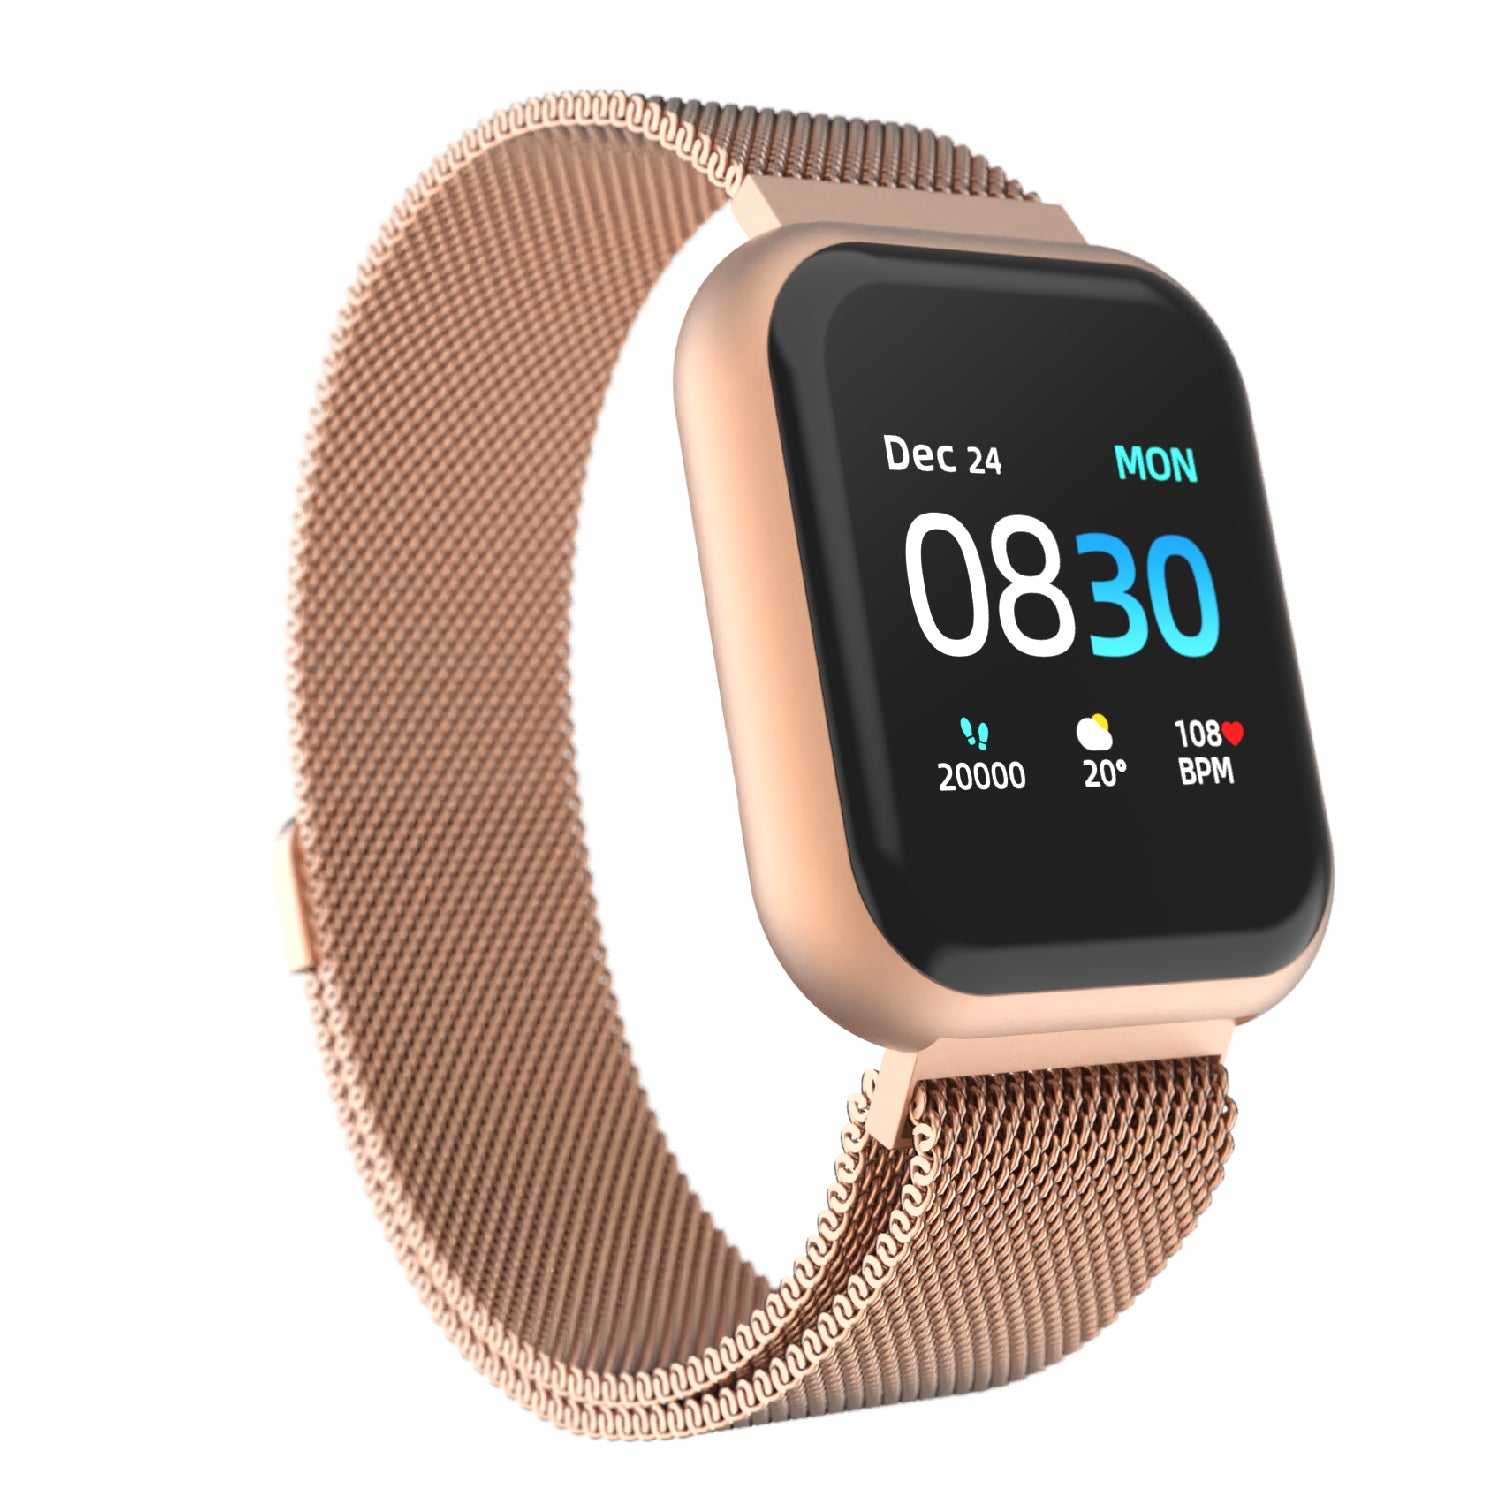 iTouch Air 3 Smartwatch in Rose Gold with Rose Gold Strap